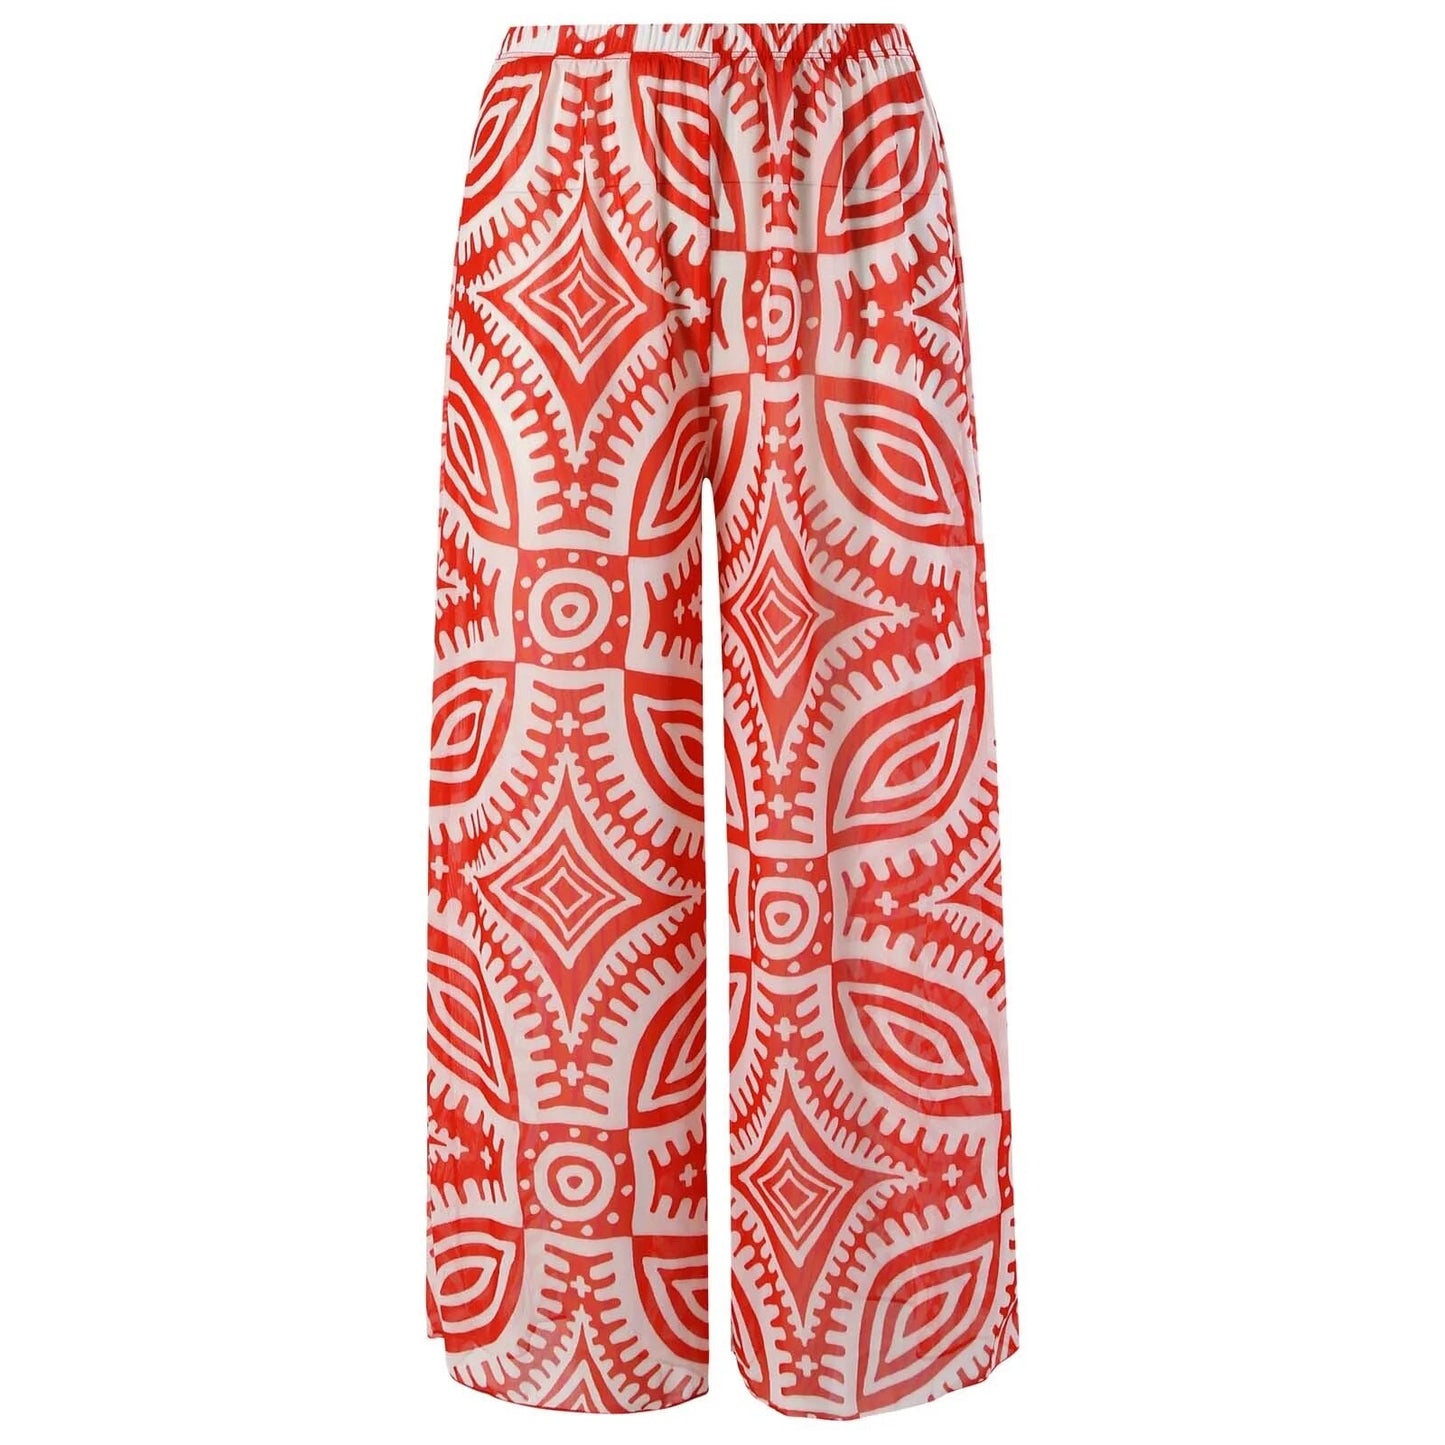 Red Tribal Swimsuit